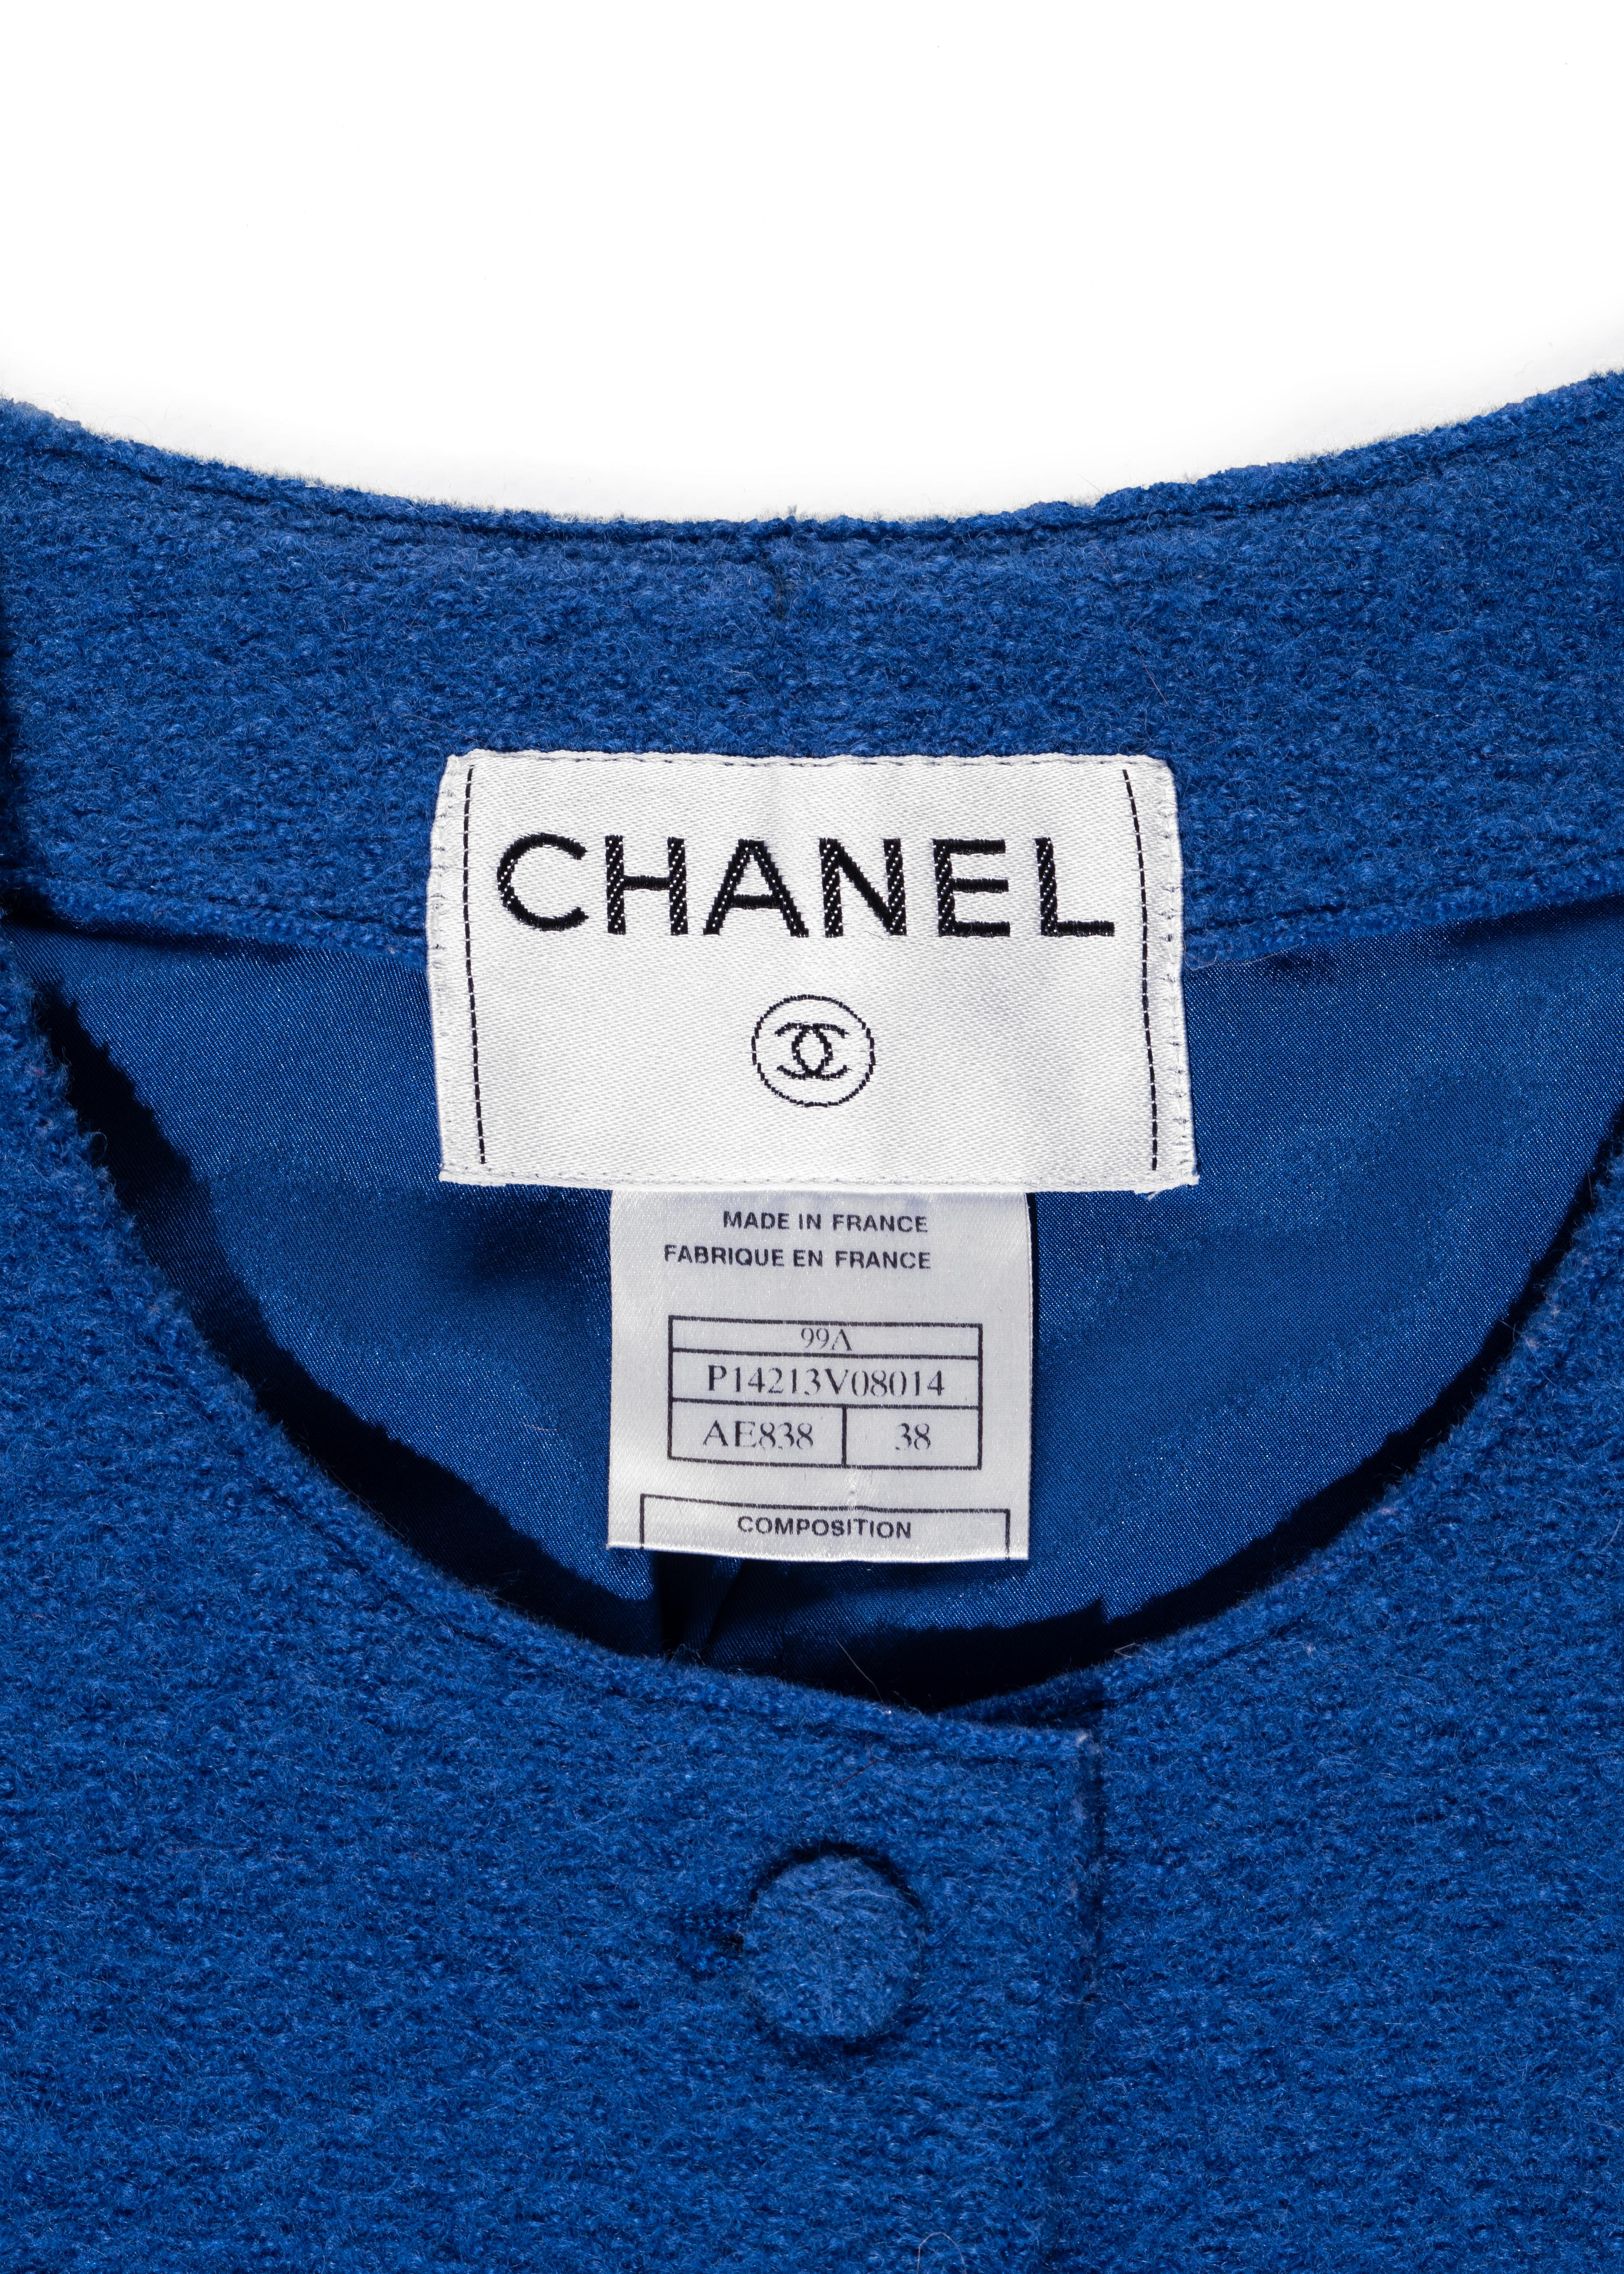 Chanel by Karl Lagerfeld blue boiled wool fitted jacket, fw 1999 4